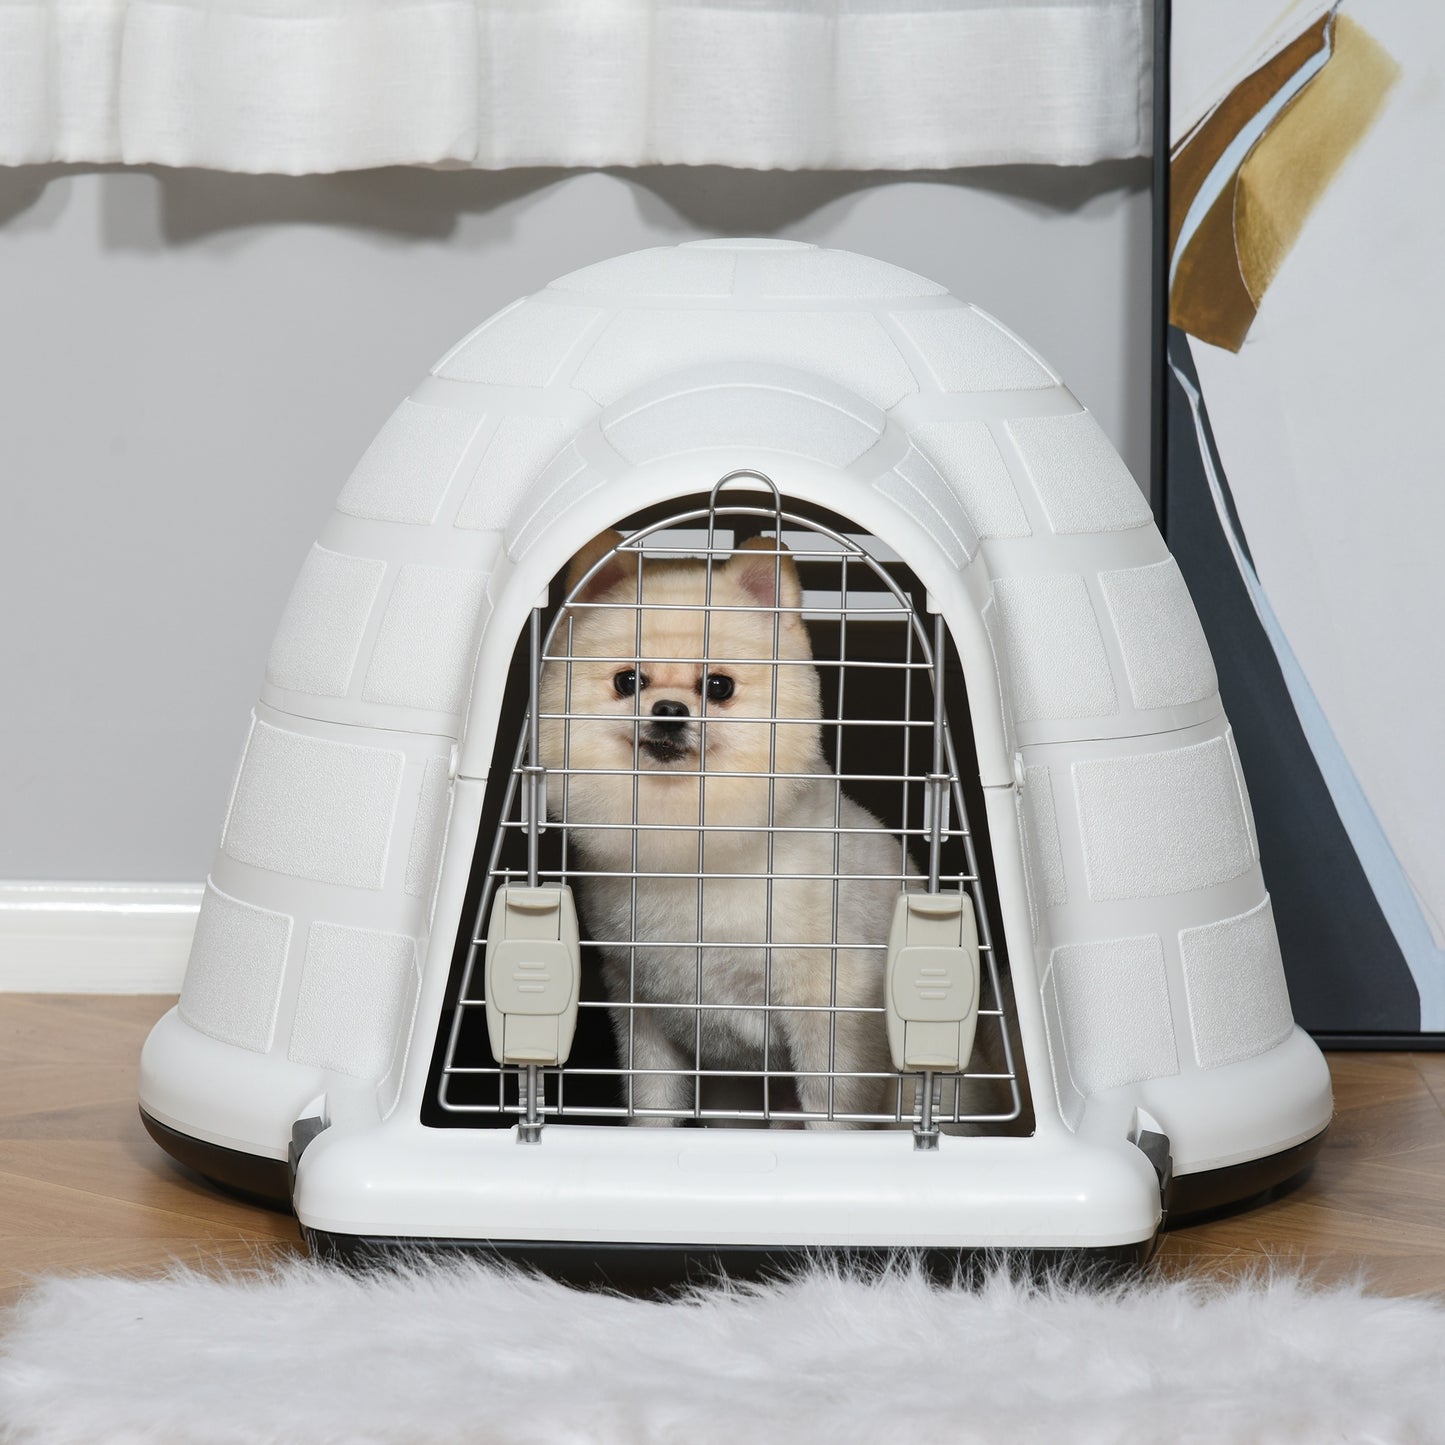 PawHut Plastic Igloo Dog House Puppy Kennel Pet Shelter w/ Windows for Small Sized Dogs